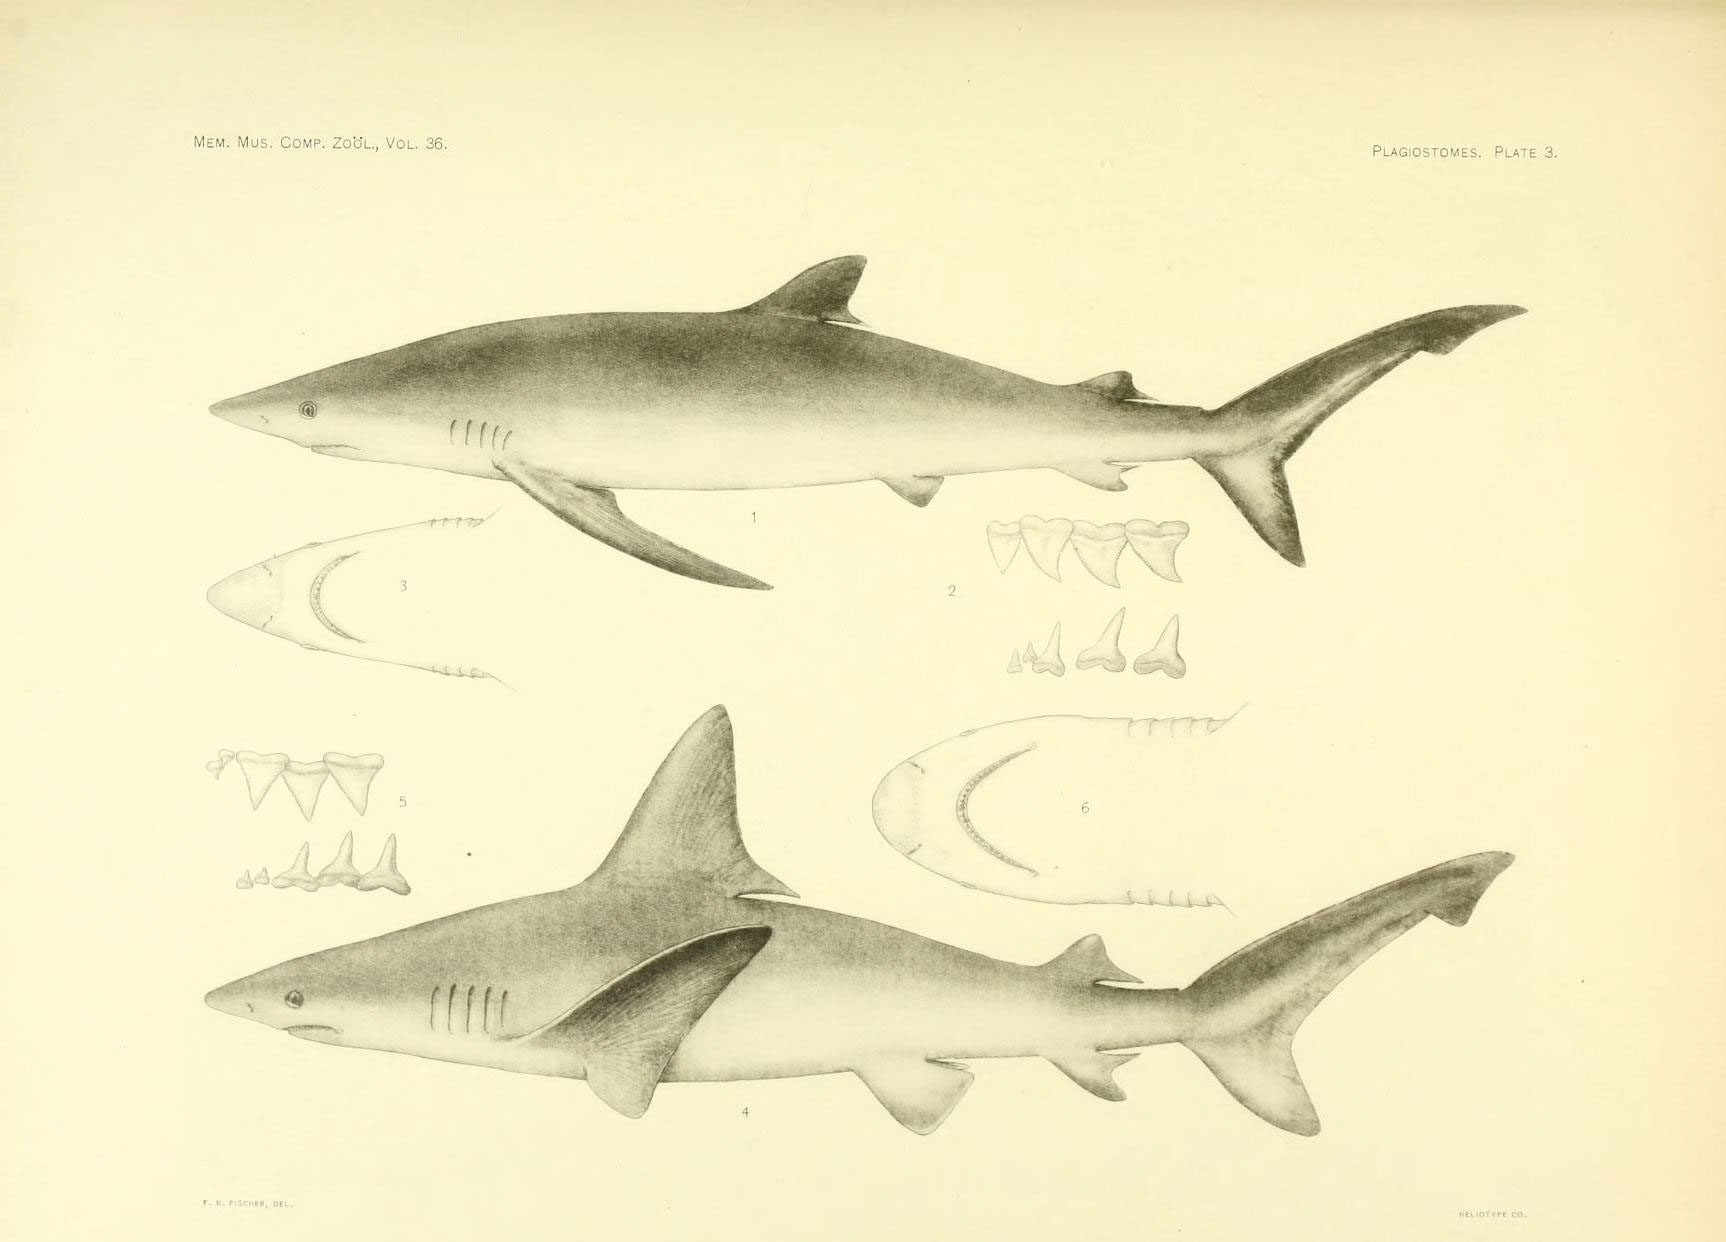 three drawings of sharks by an artist with various features